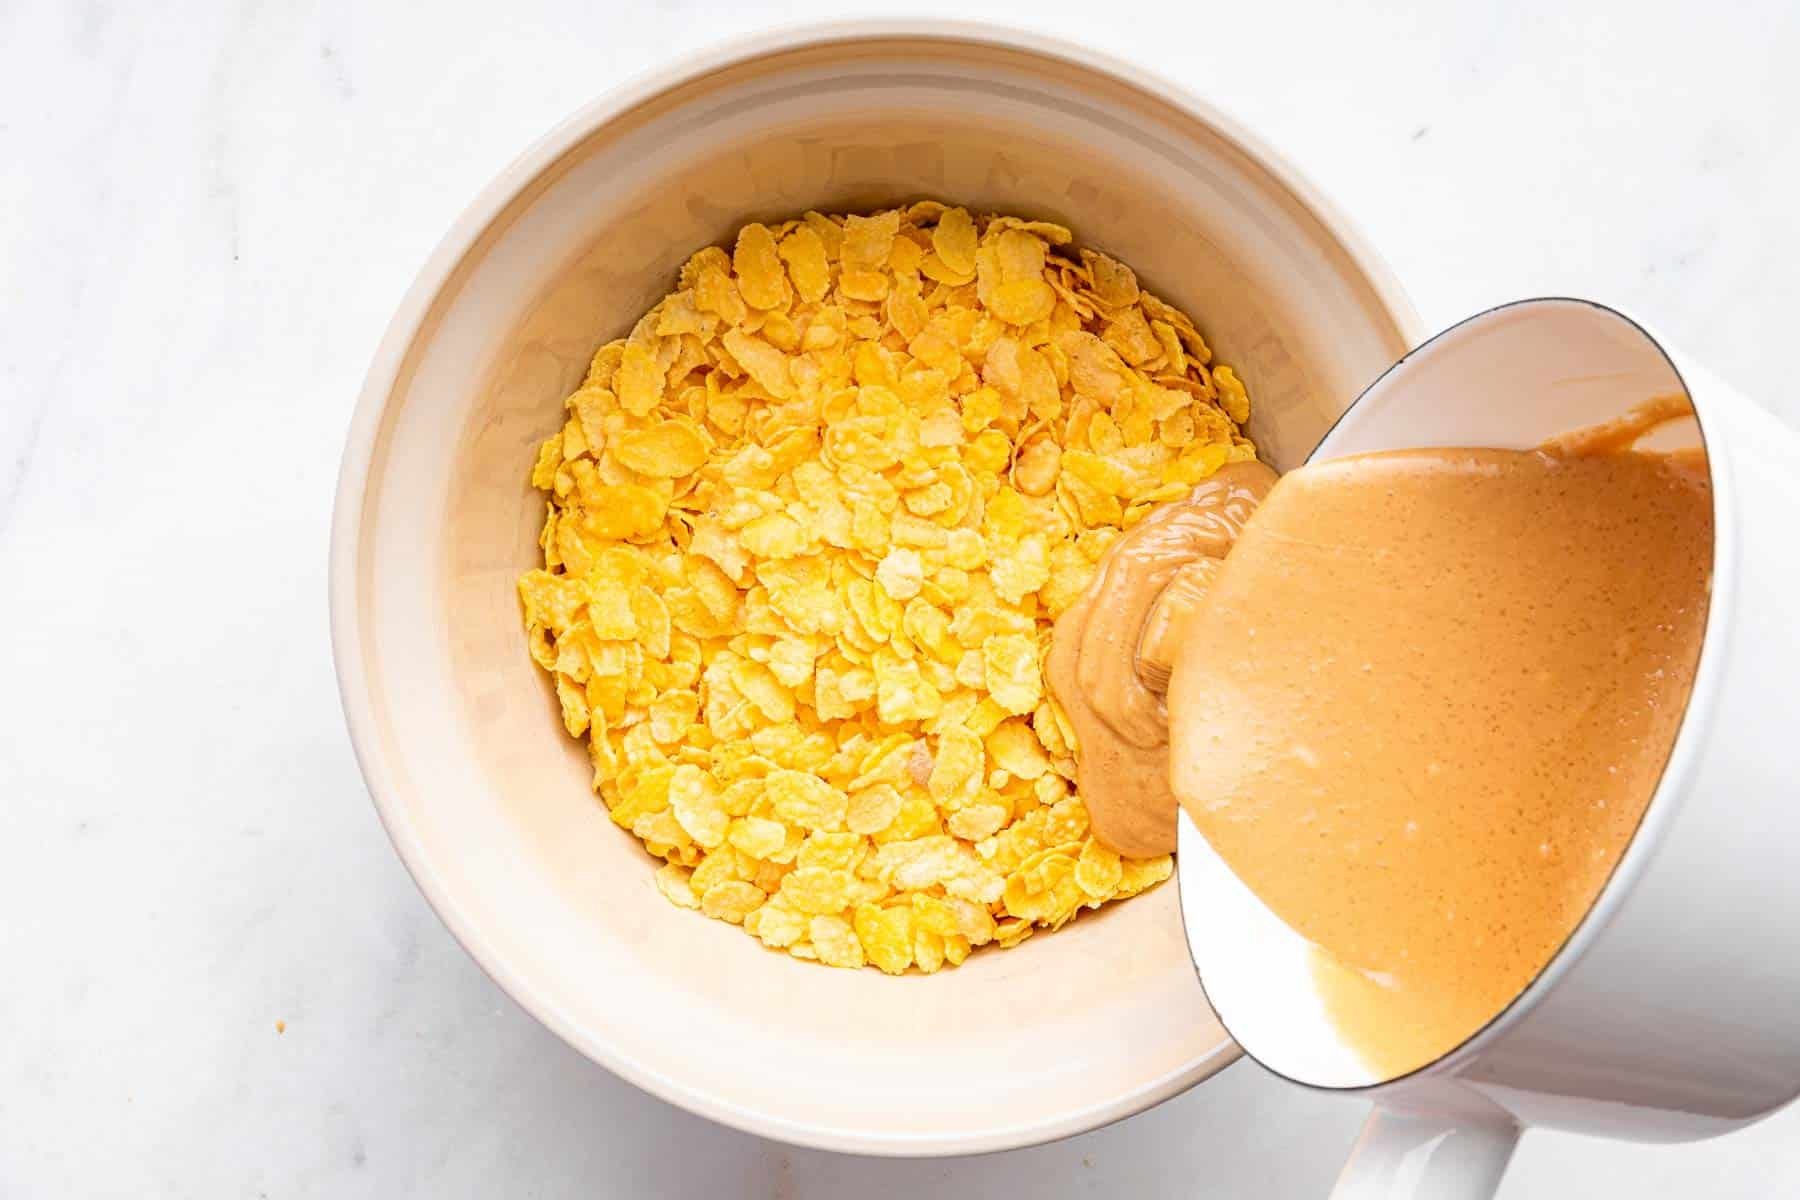 Melted peanut butter being poured over a bowl of cornflakes.